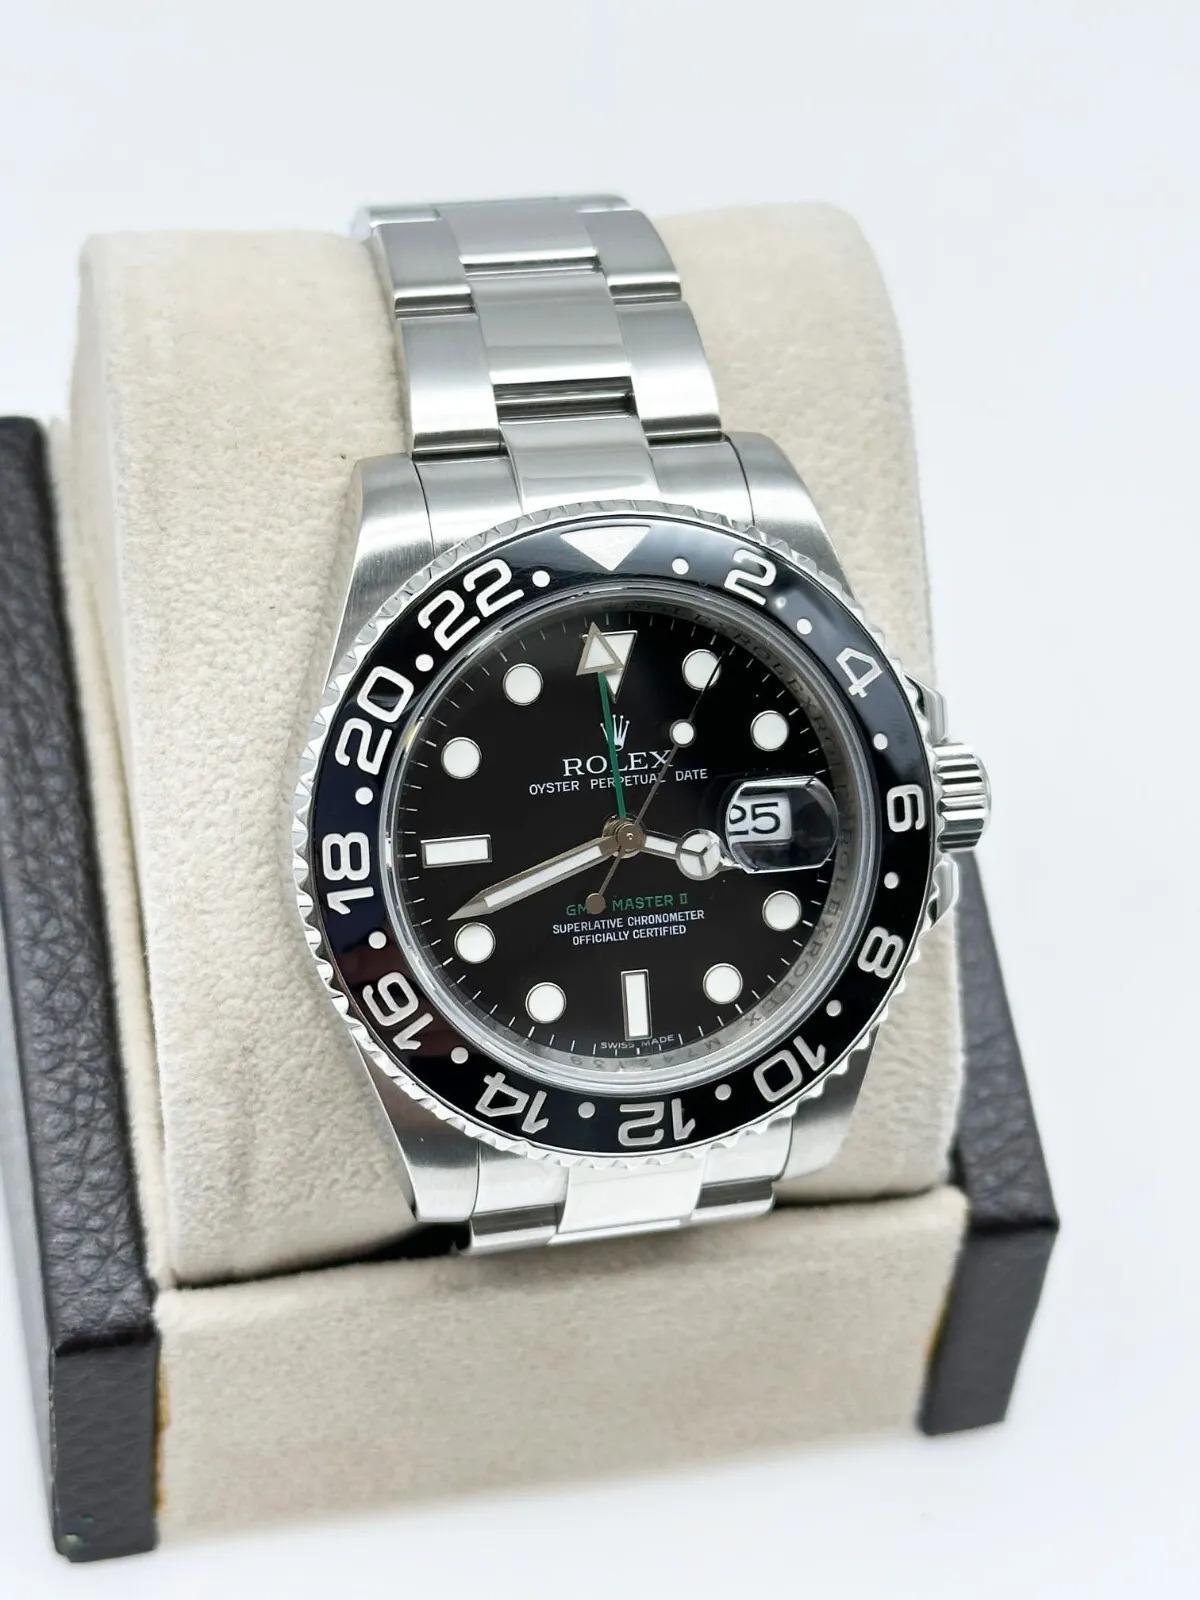 Rolex GMT Master II 116710 Black Ceramic Stainless Steel In Excellent Condition For Sale In San Diego, CA